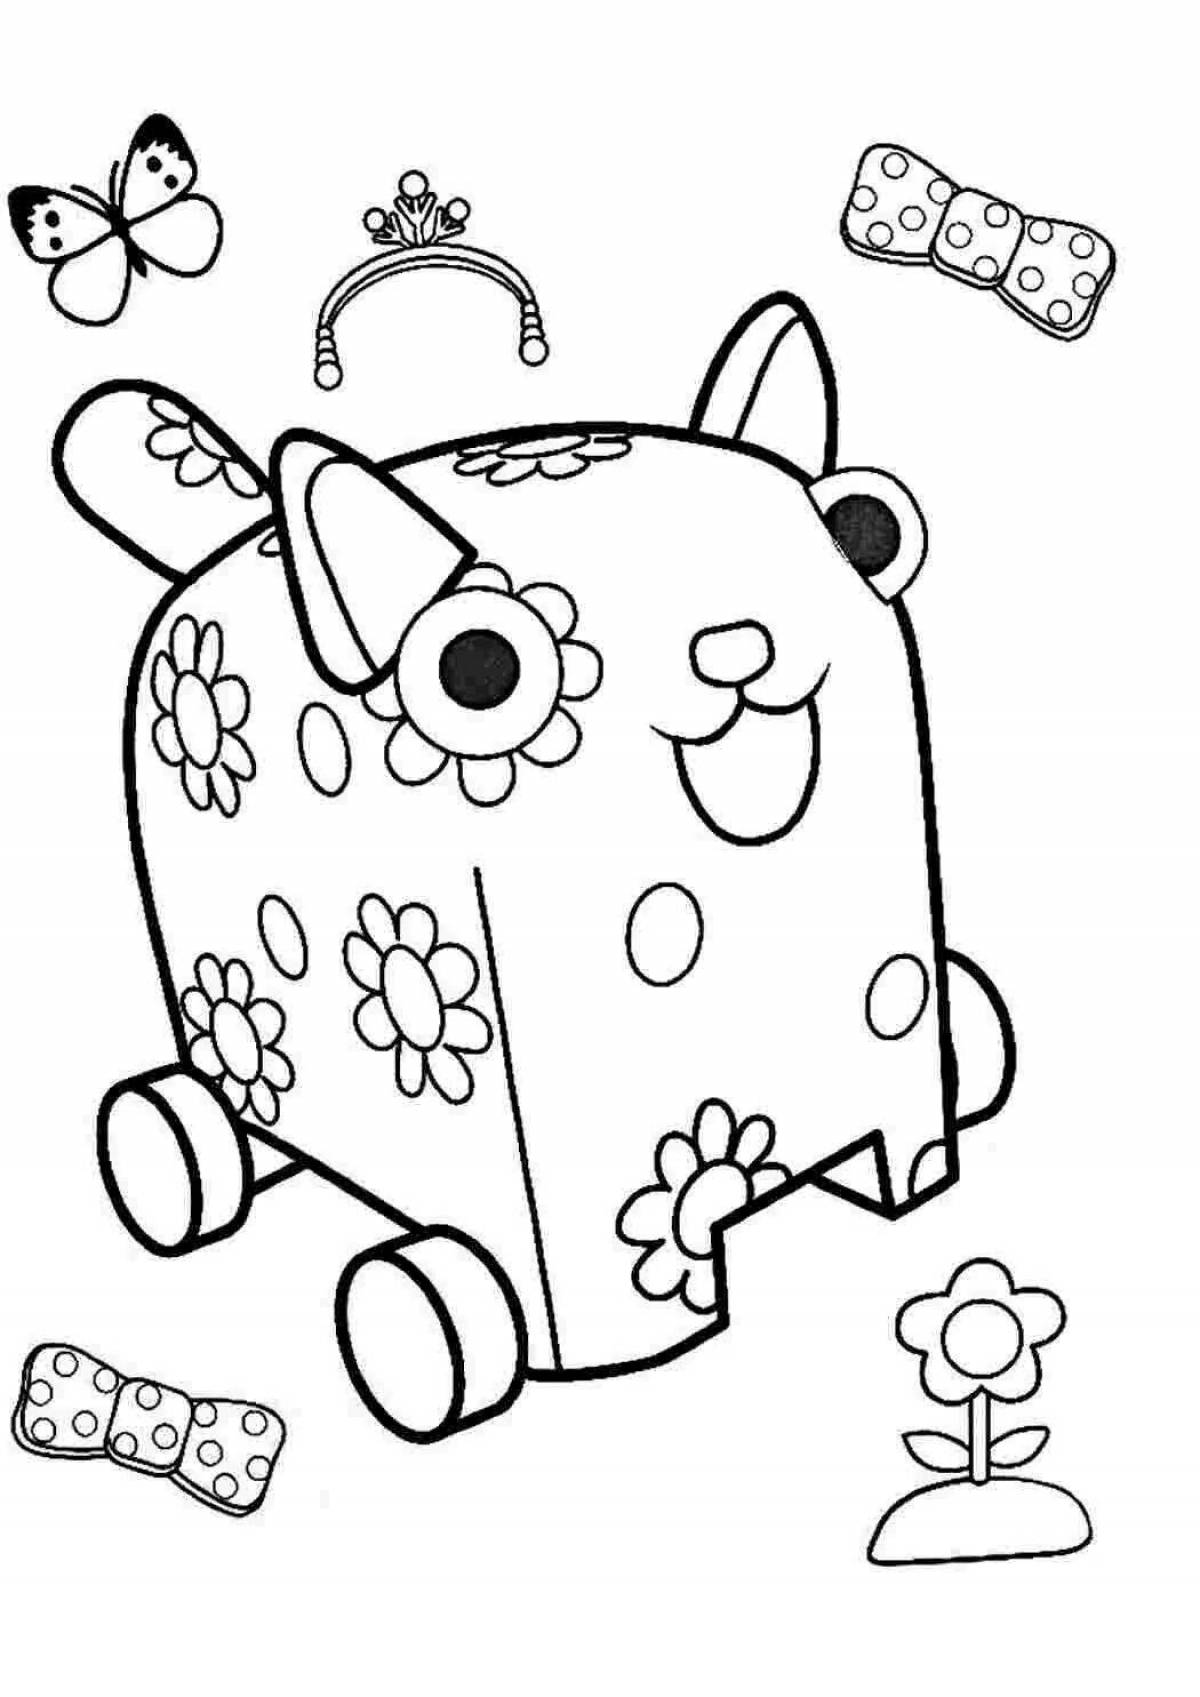 Coloring book playful wooden dog